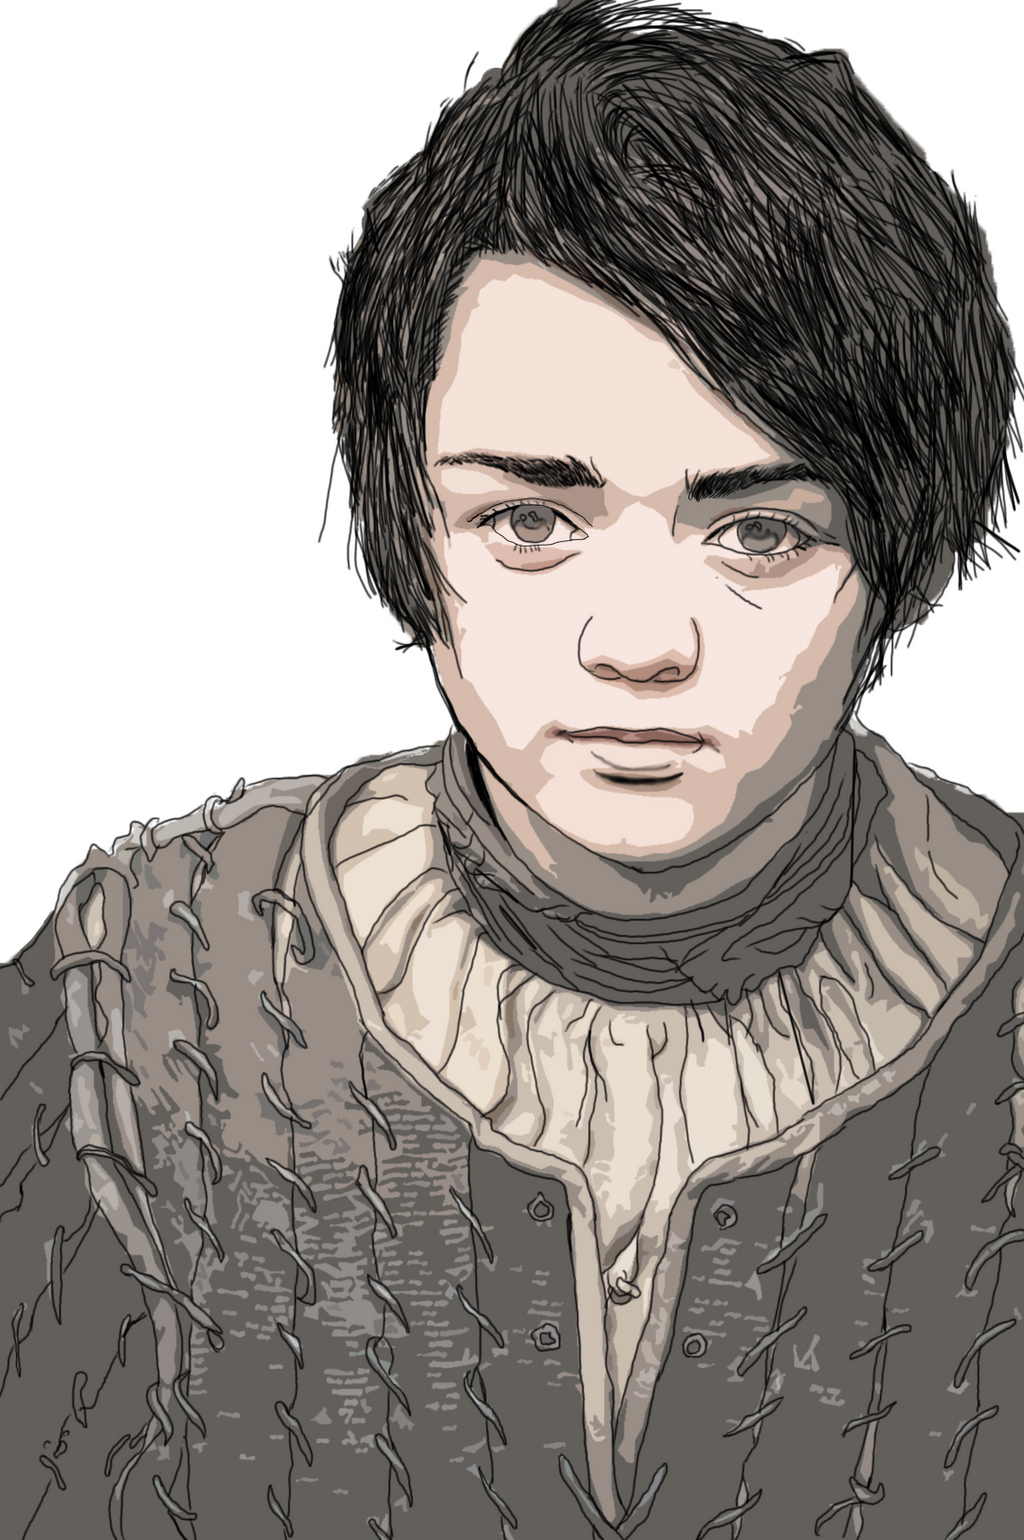 arya_stark_colouring_by_starky93-d7o6fu3.png